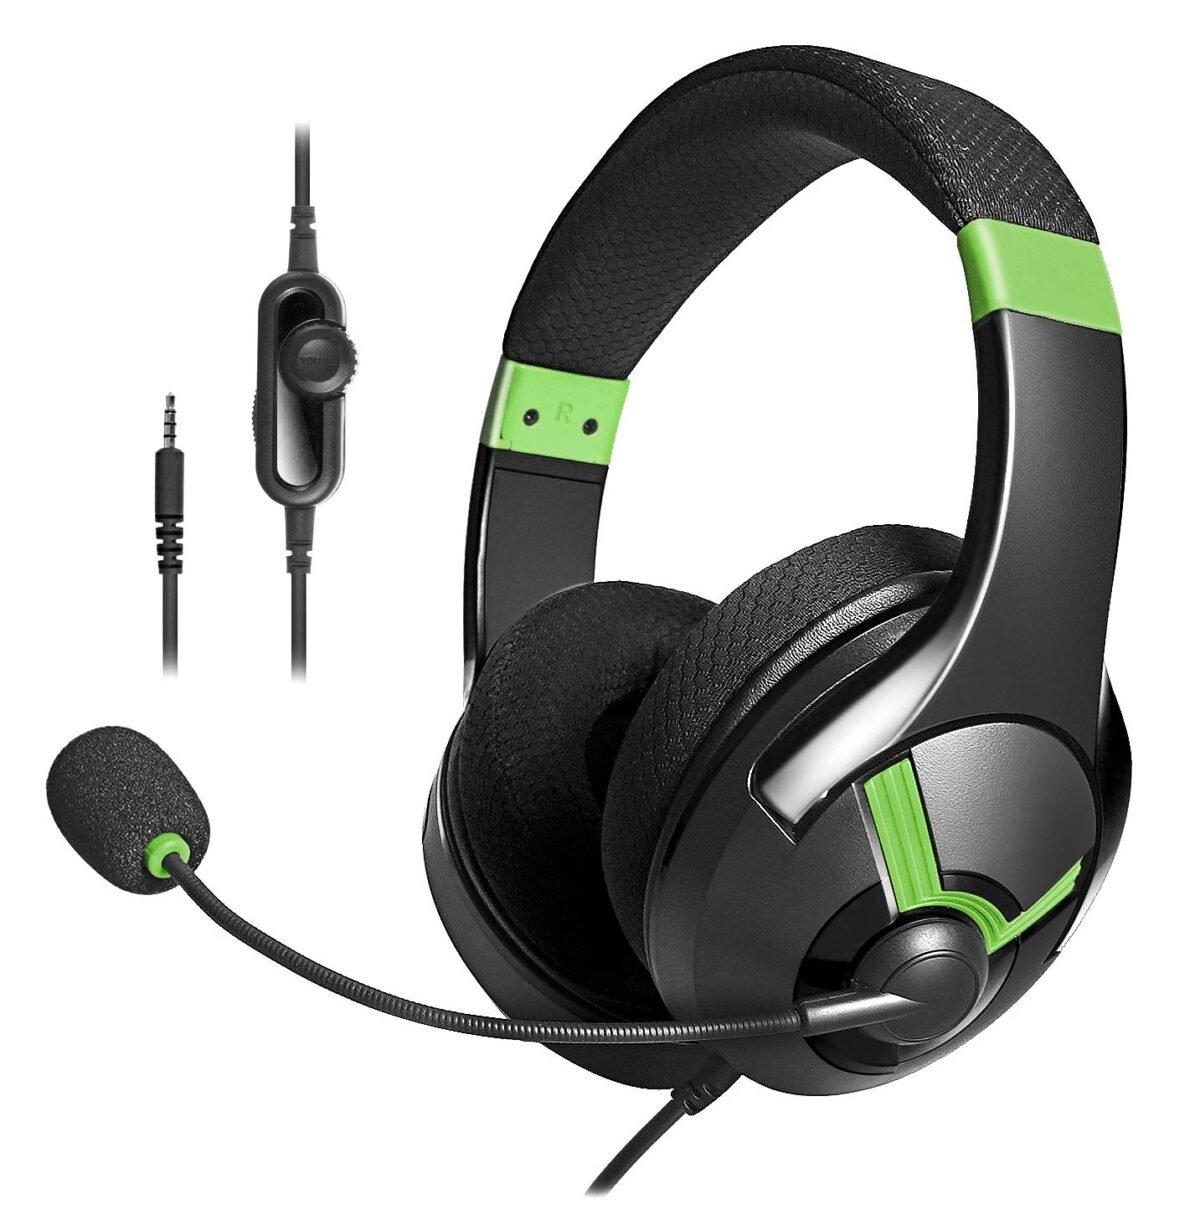 G1500 7.1 Channel USB Headset for PC